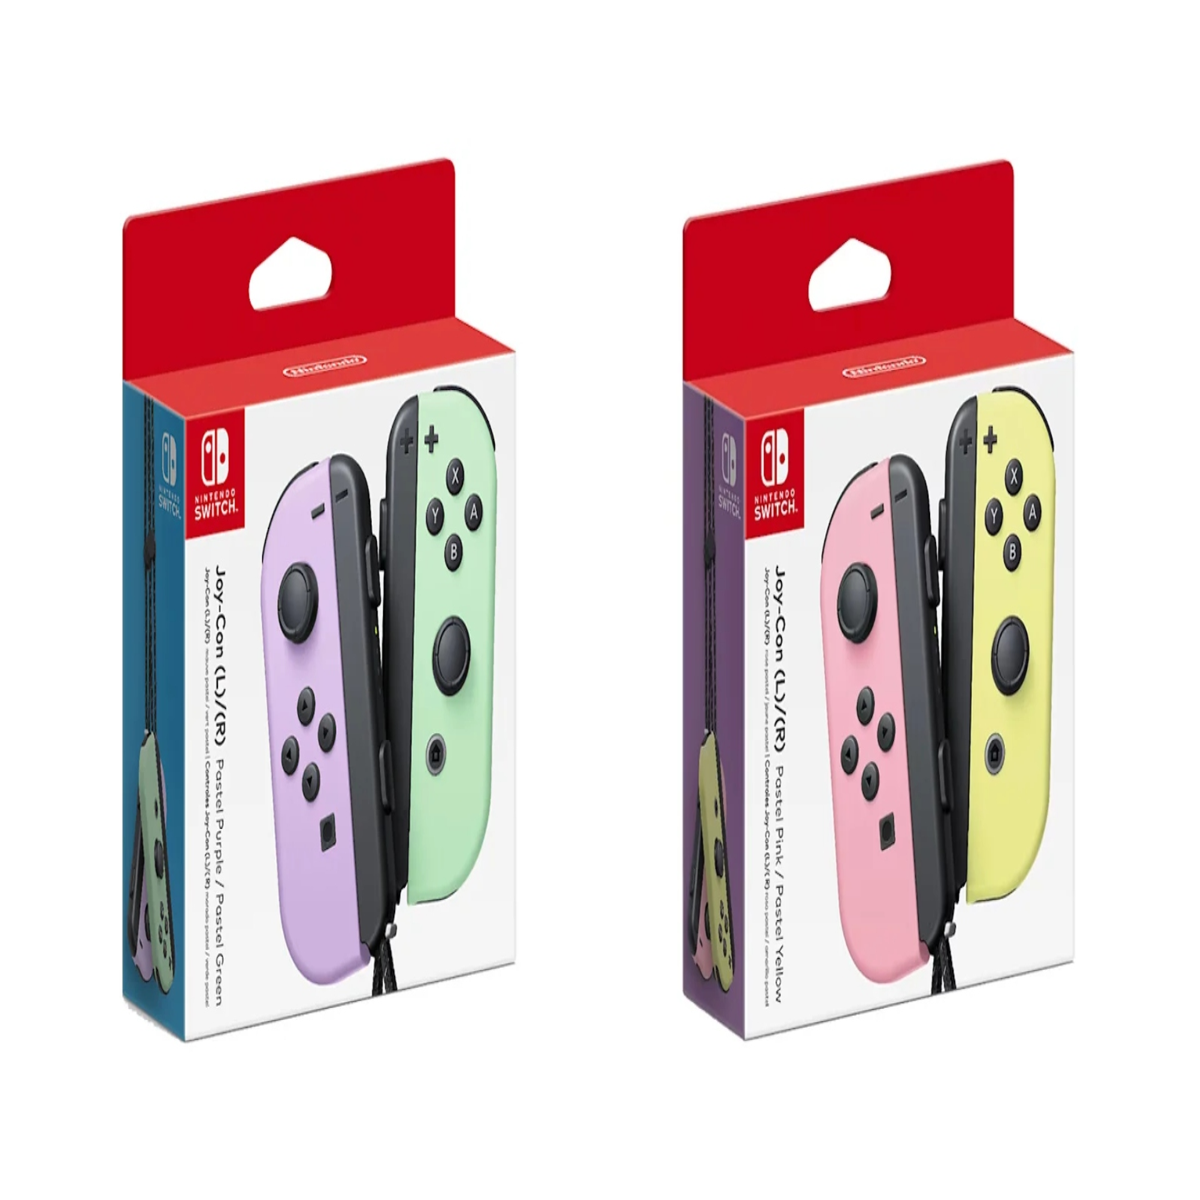 https://assetsio.gnwcdn.com/Nintendo-Switch-Pastel-Joy-Con-Controllers-Pair-Set.jpg?width=1200&height=1200&fit=crop&quality=100&format=png&enable=upscale&auto=webp